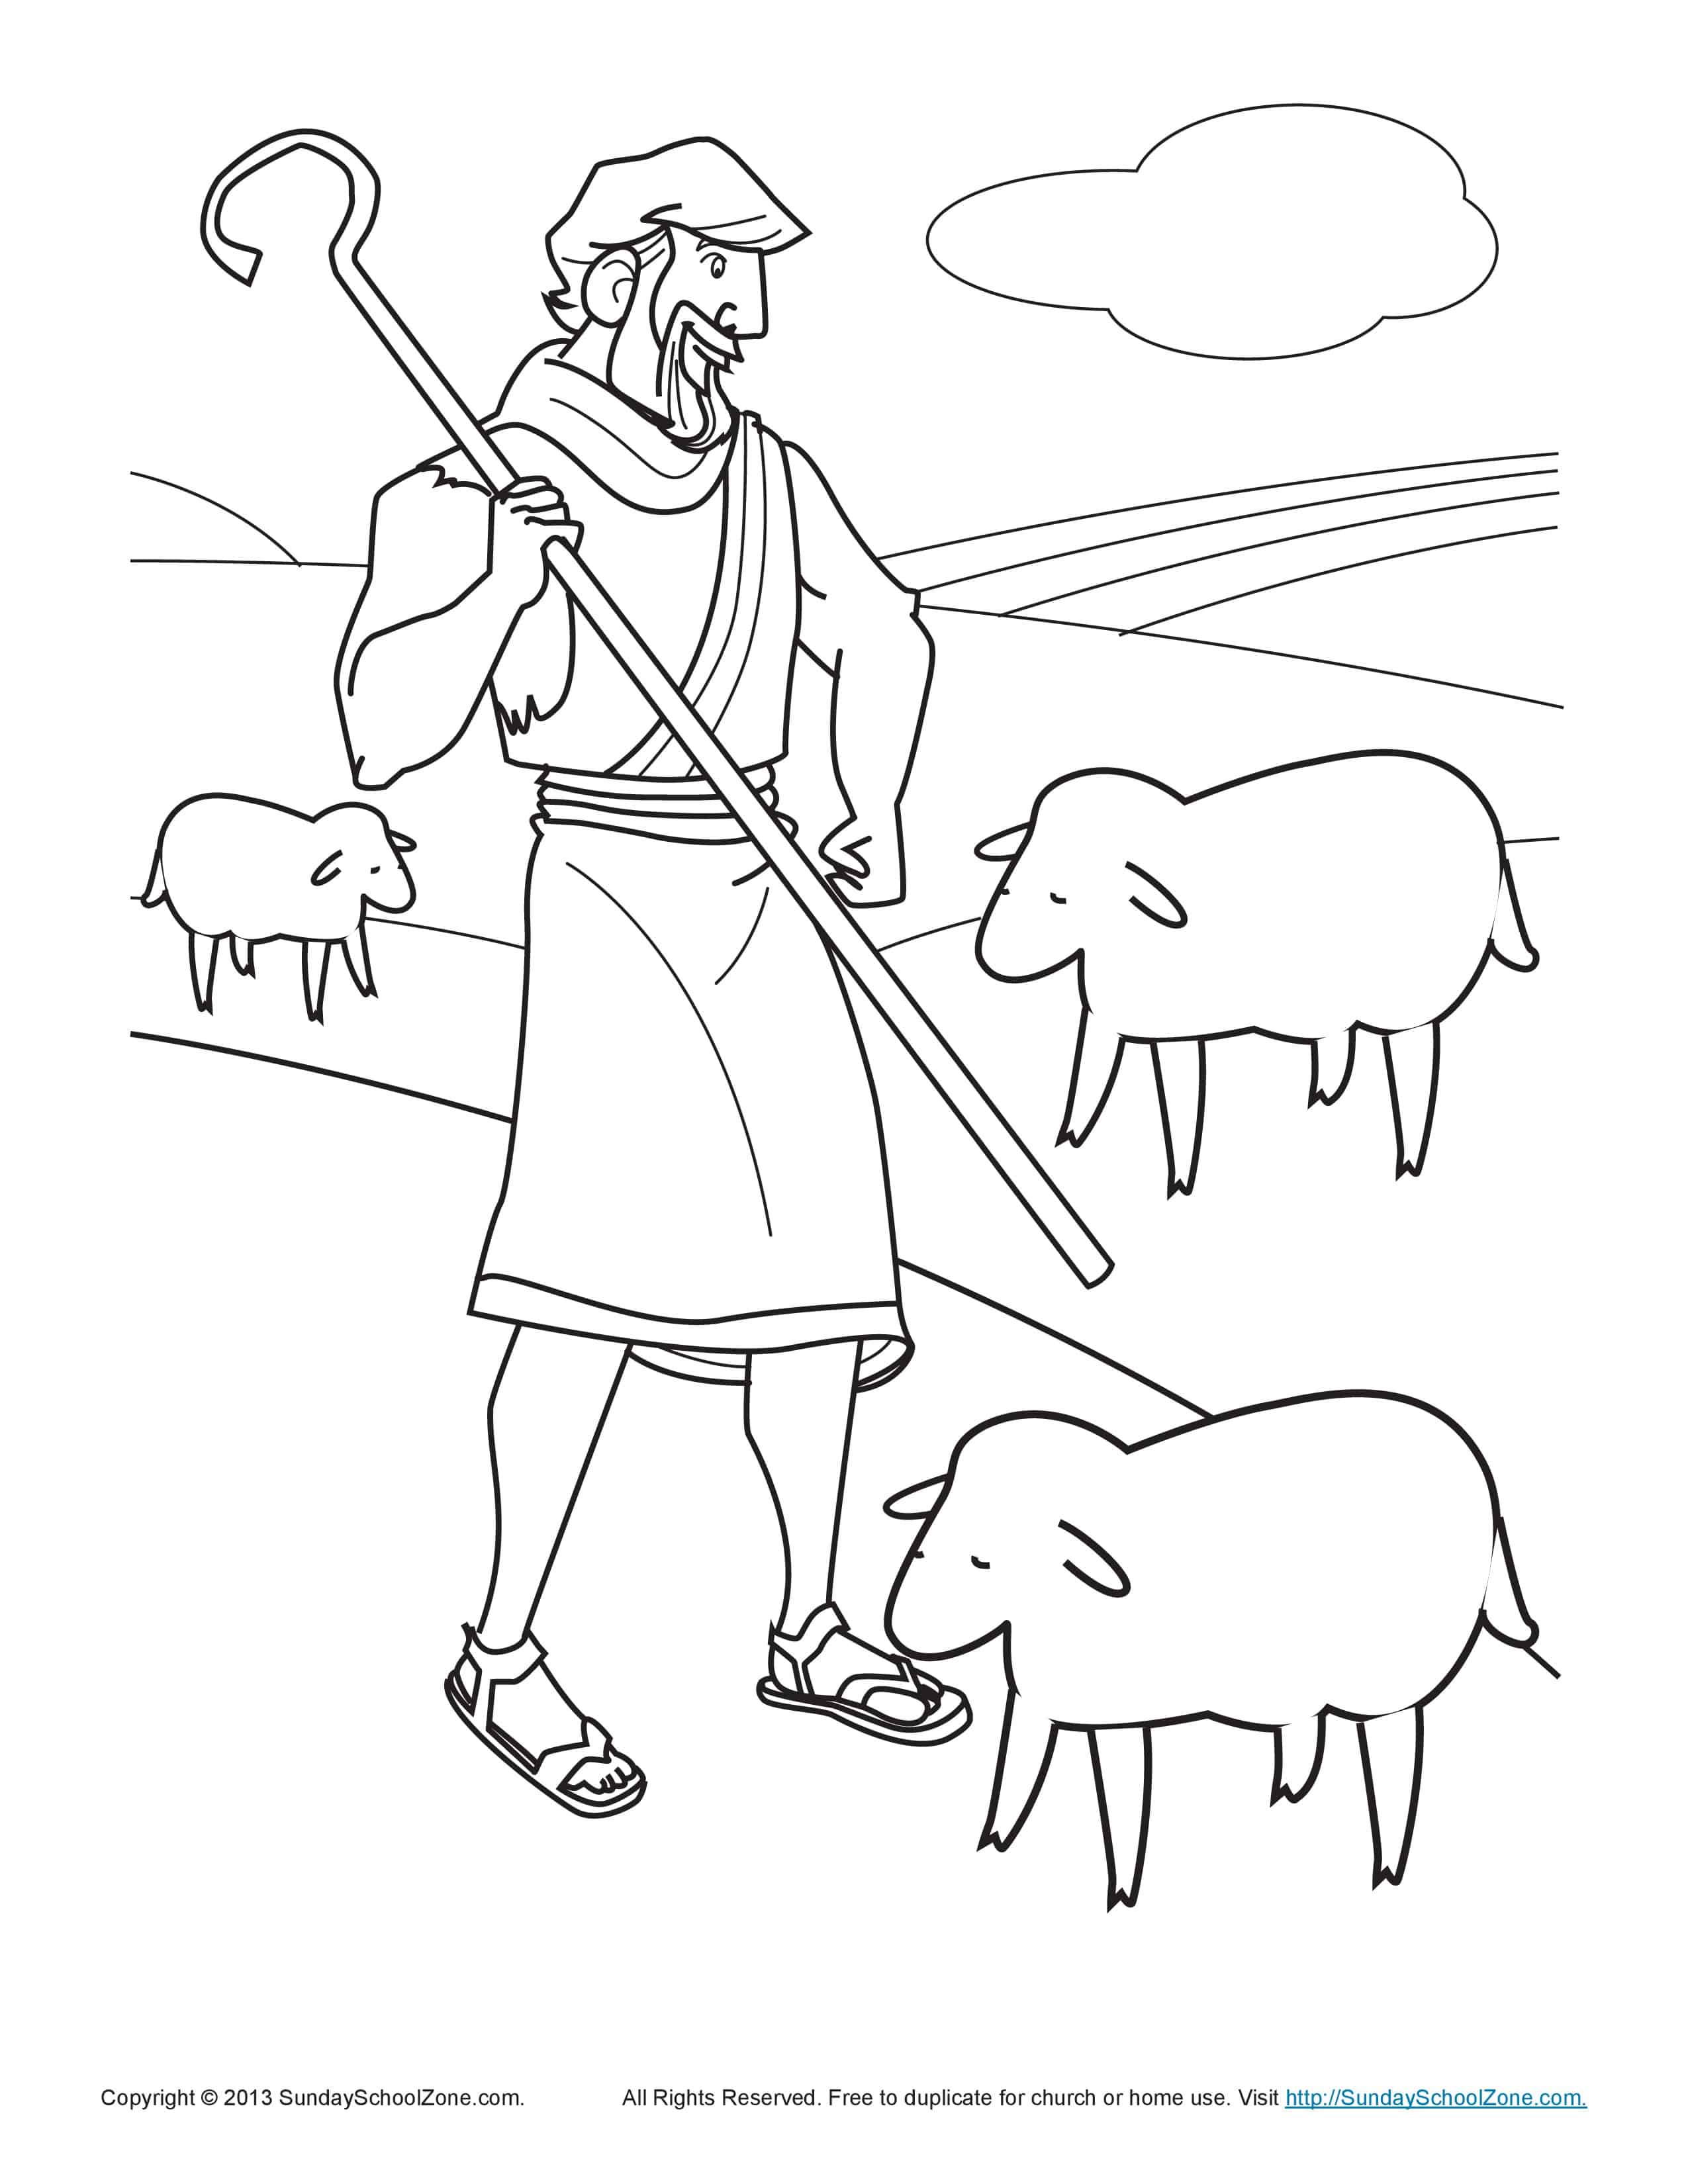 Bible Coloring Pages for Kids   The Shepherd Tends His Flock